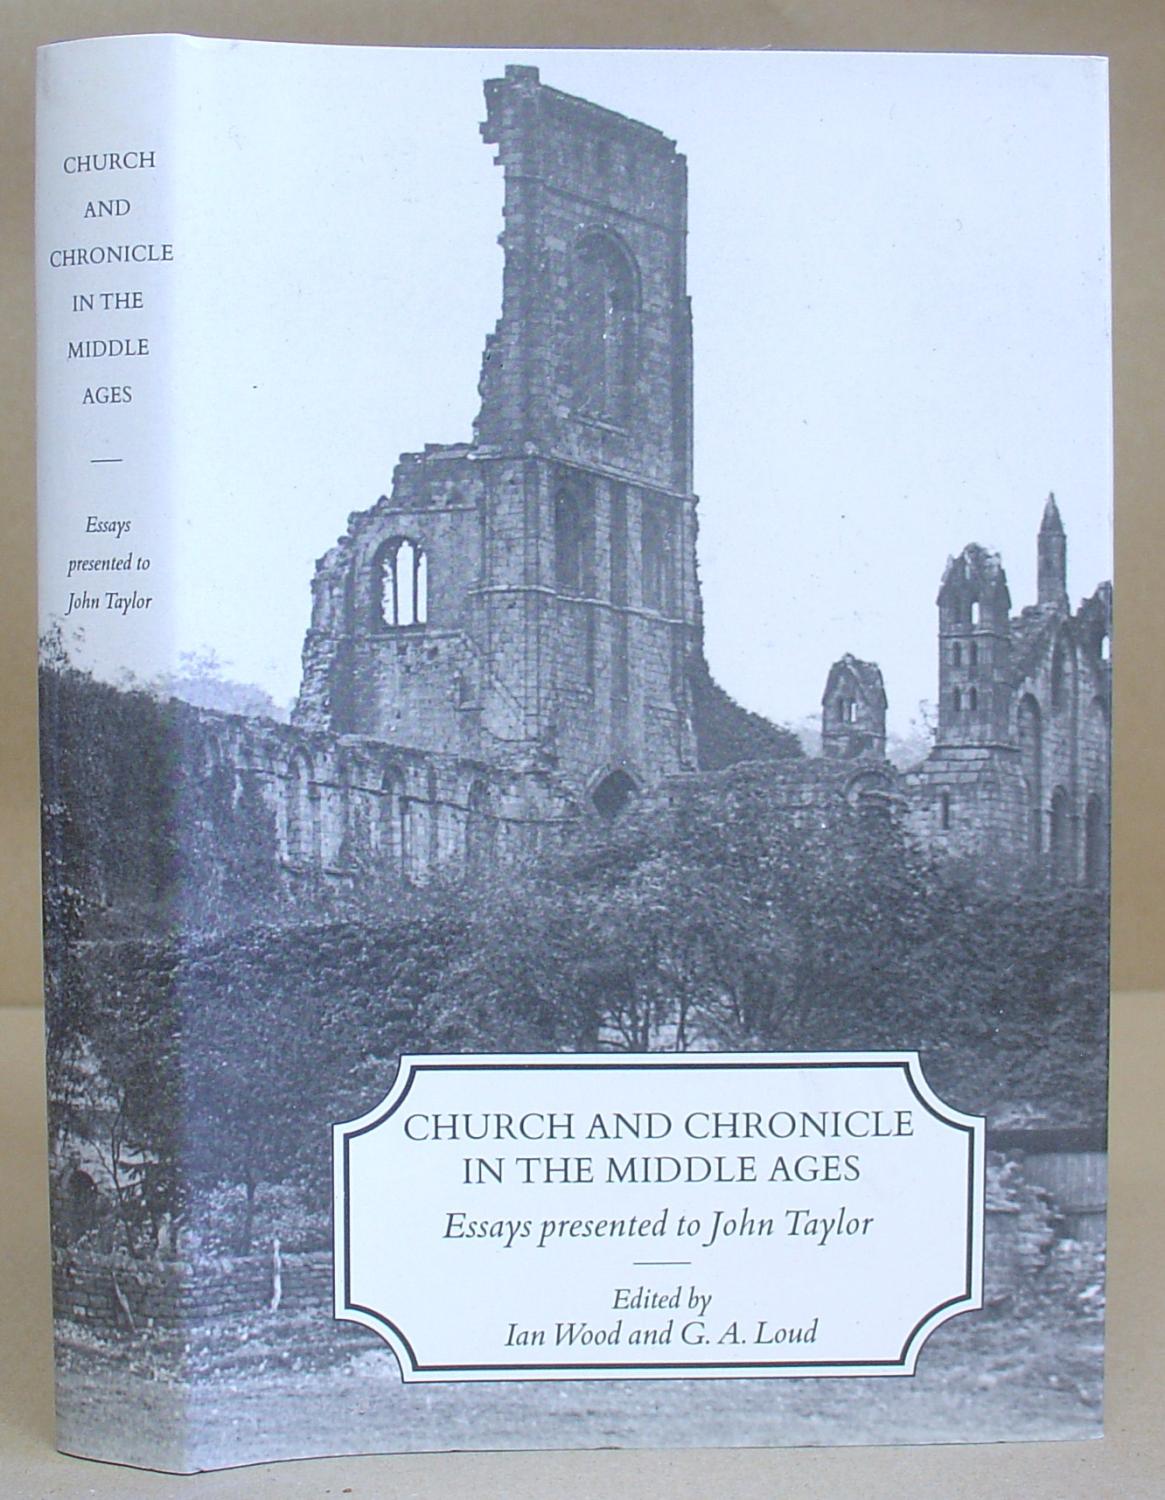 Church And Chronicle In The Middle Ages - Essays Presented To John Taylor - Wood, Ian & Loud, G A [editors]